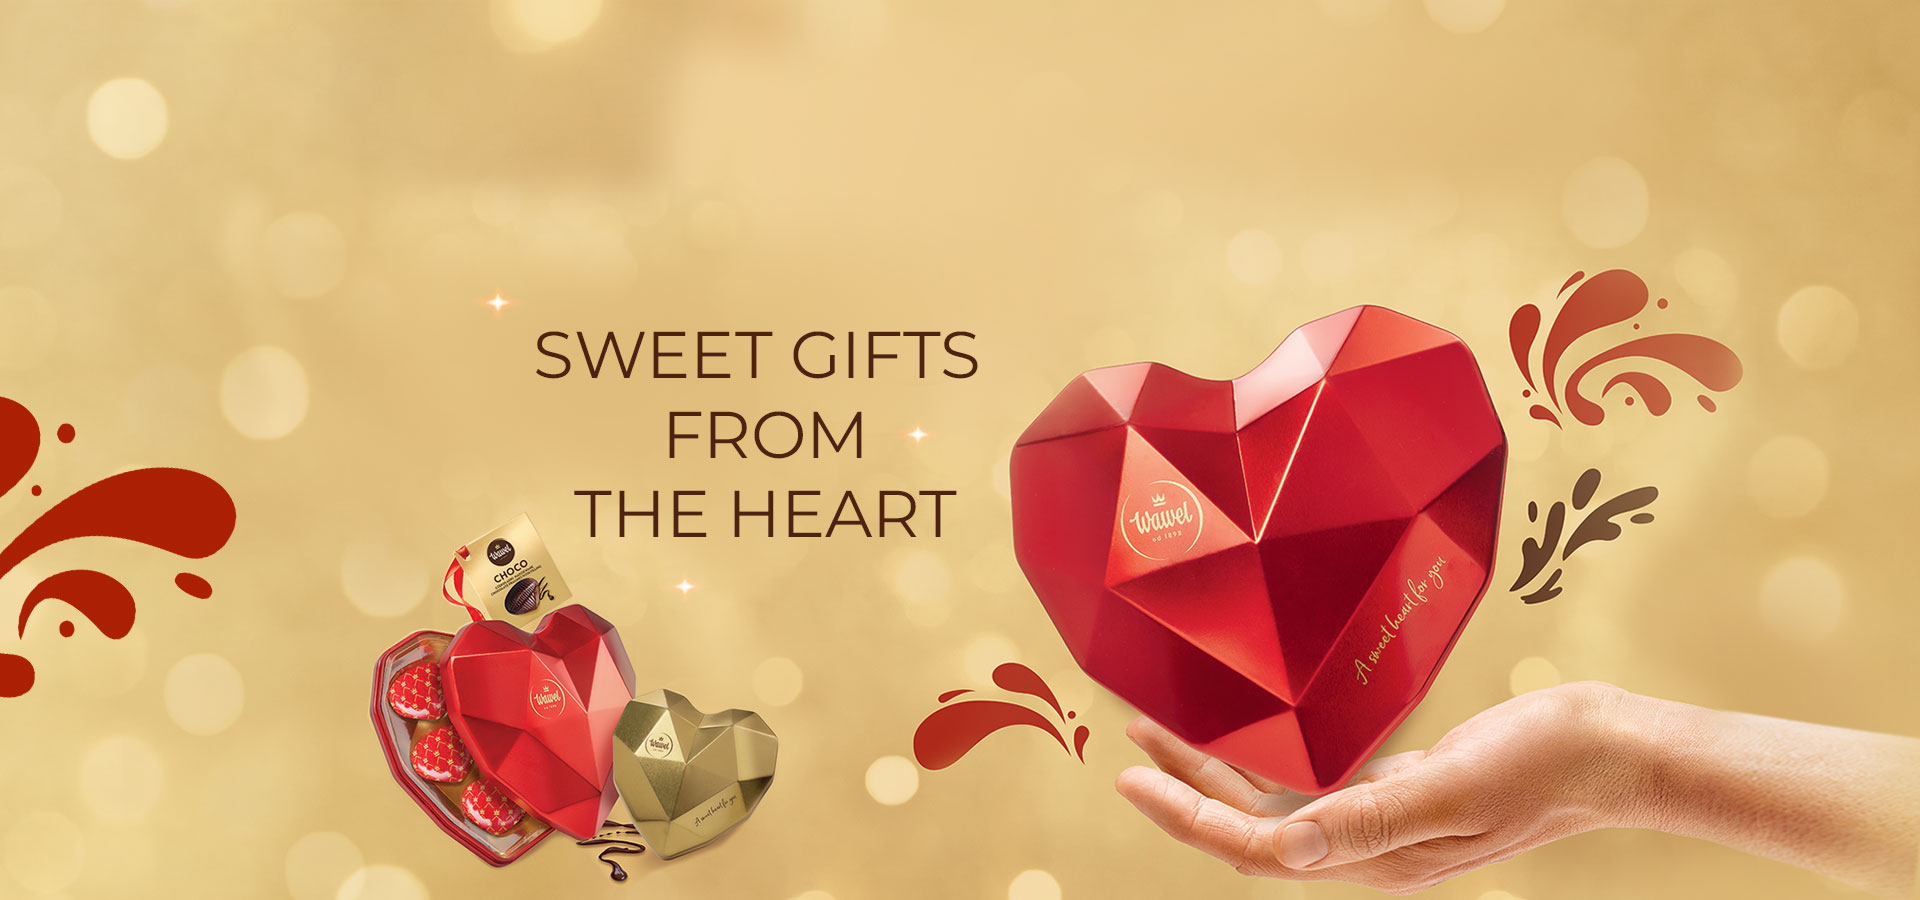 Sweet gifts from the heart